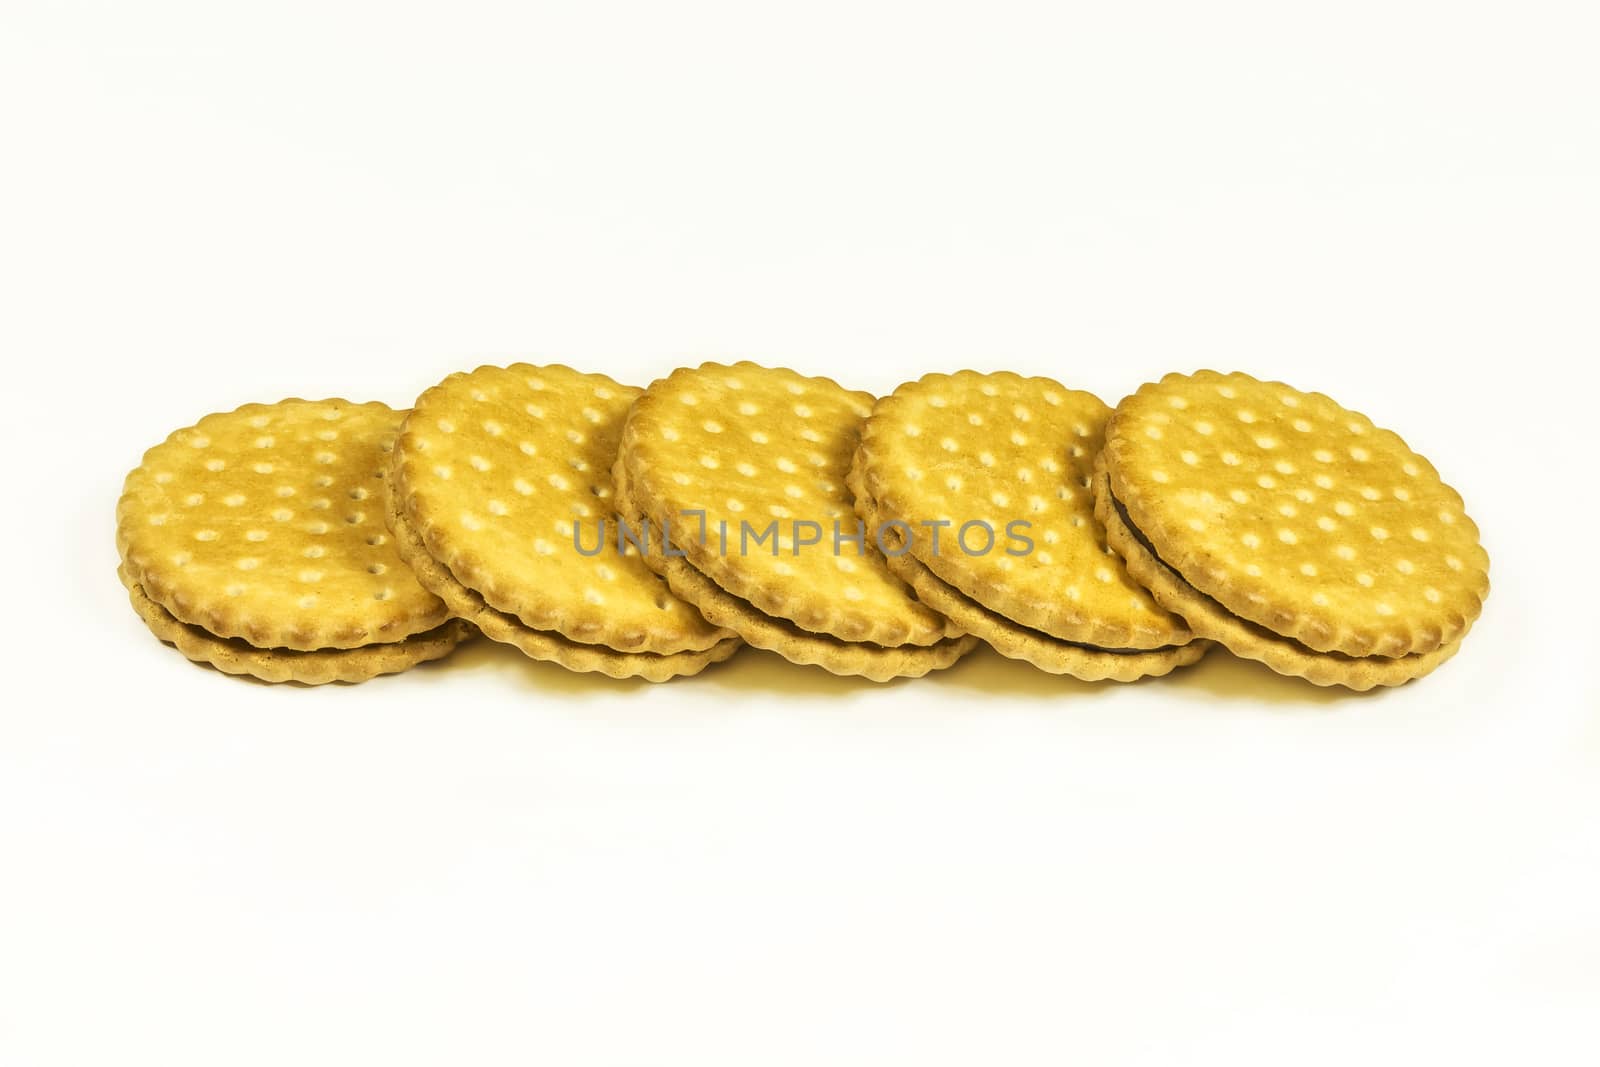 Round biscuits with chocolate filling lie on a light background by Grommik